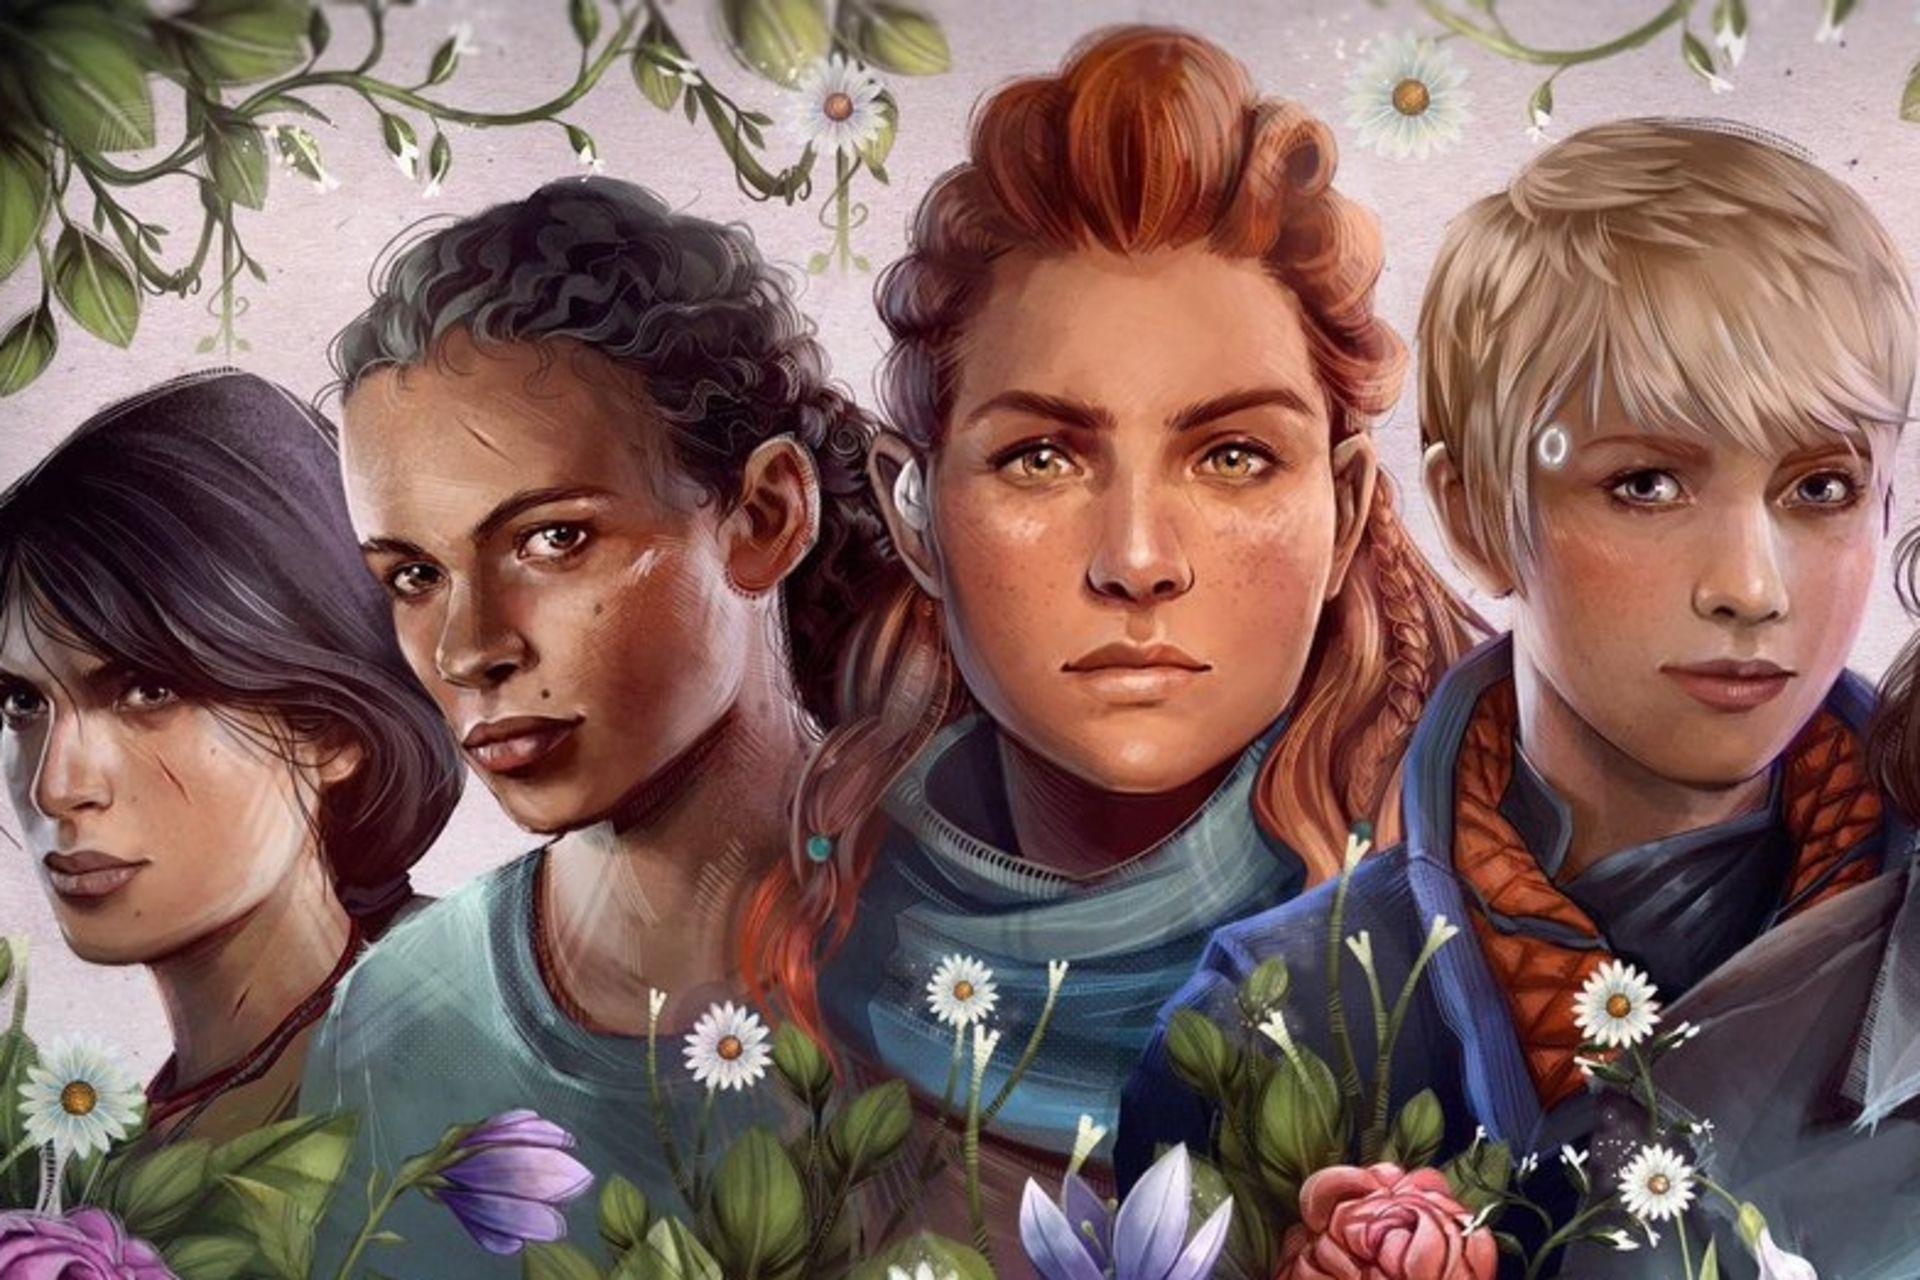 PlayStation 4 has a stunning free theme for International Women's